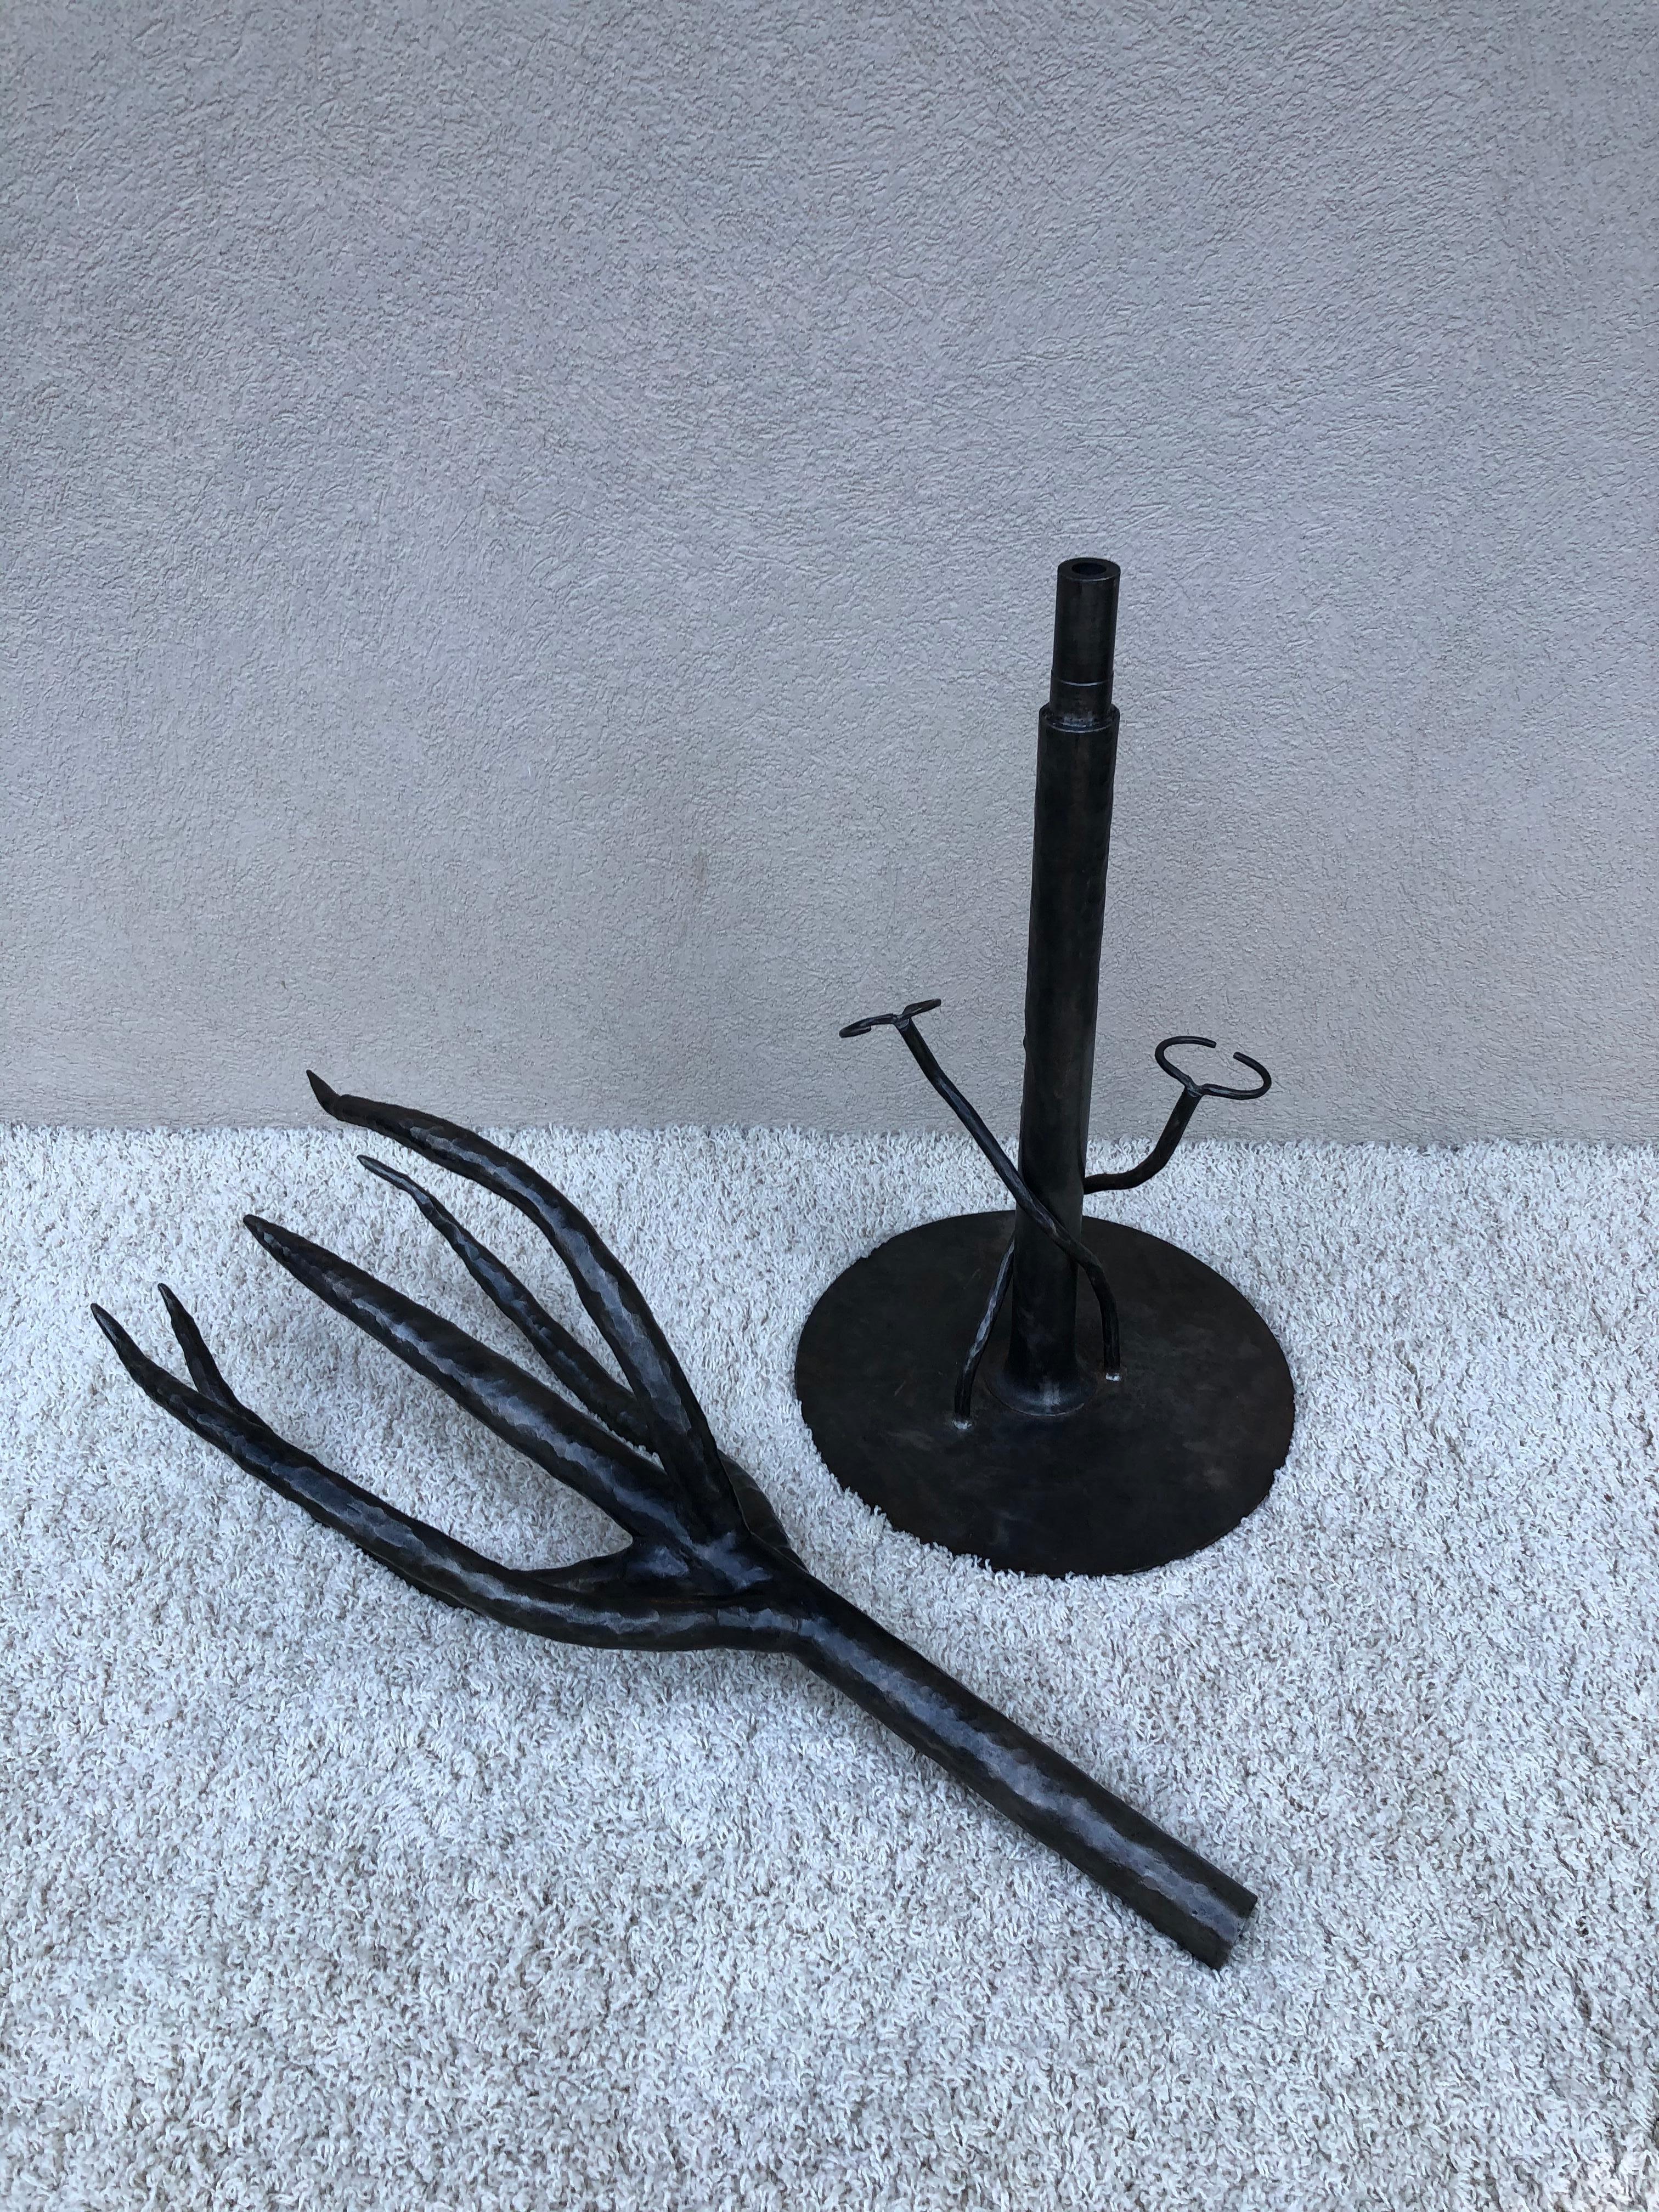 Handwrought Cactus Coat Hall Tree /Umbrella Stand Entrance Sculpture In Good Condition For Sale In Westport, CT